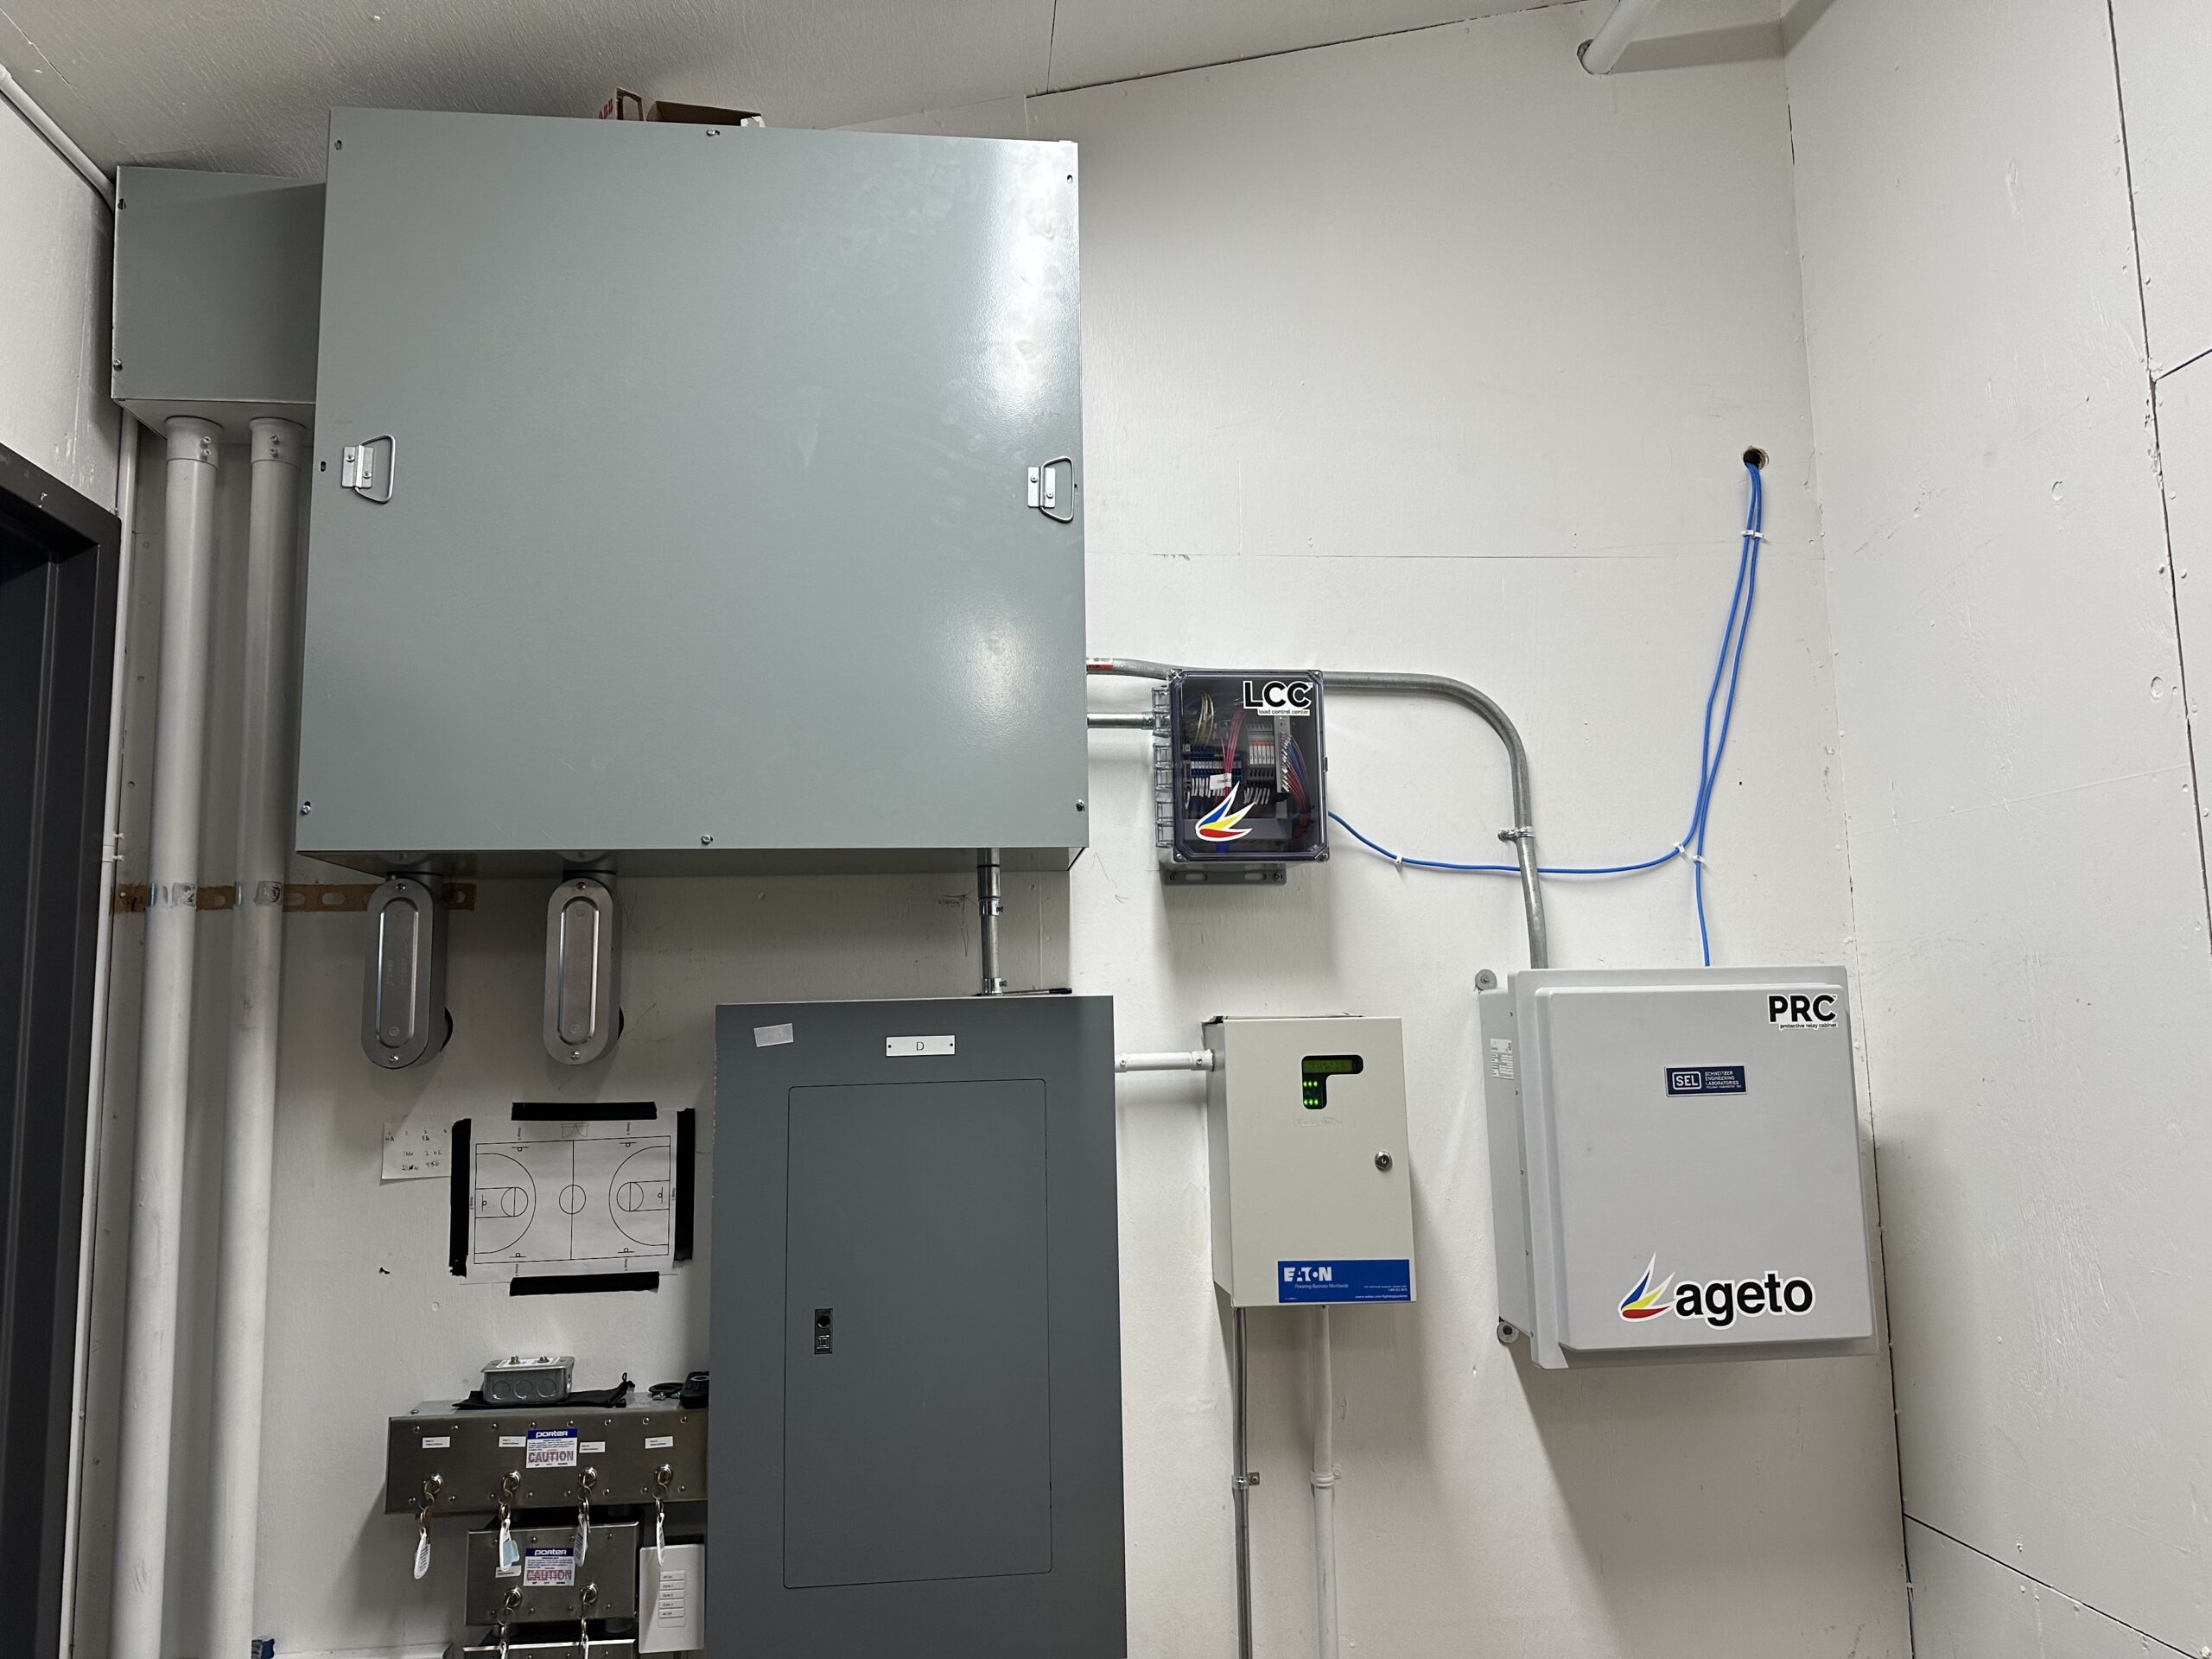 Ageto Protective Relay Cabinet (PRC) and Load Control Center (LCC) installed